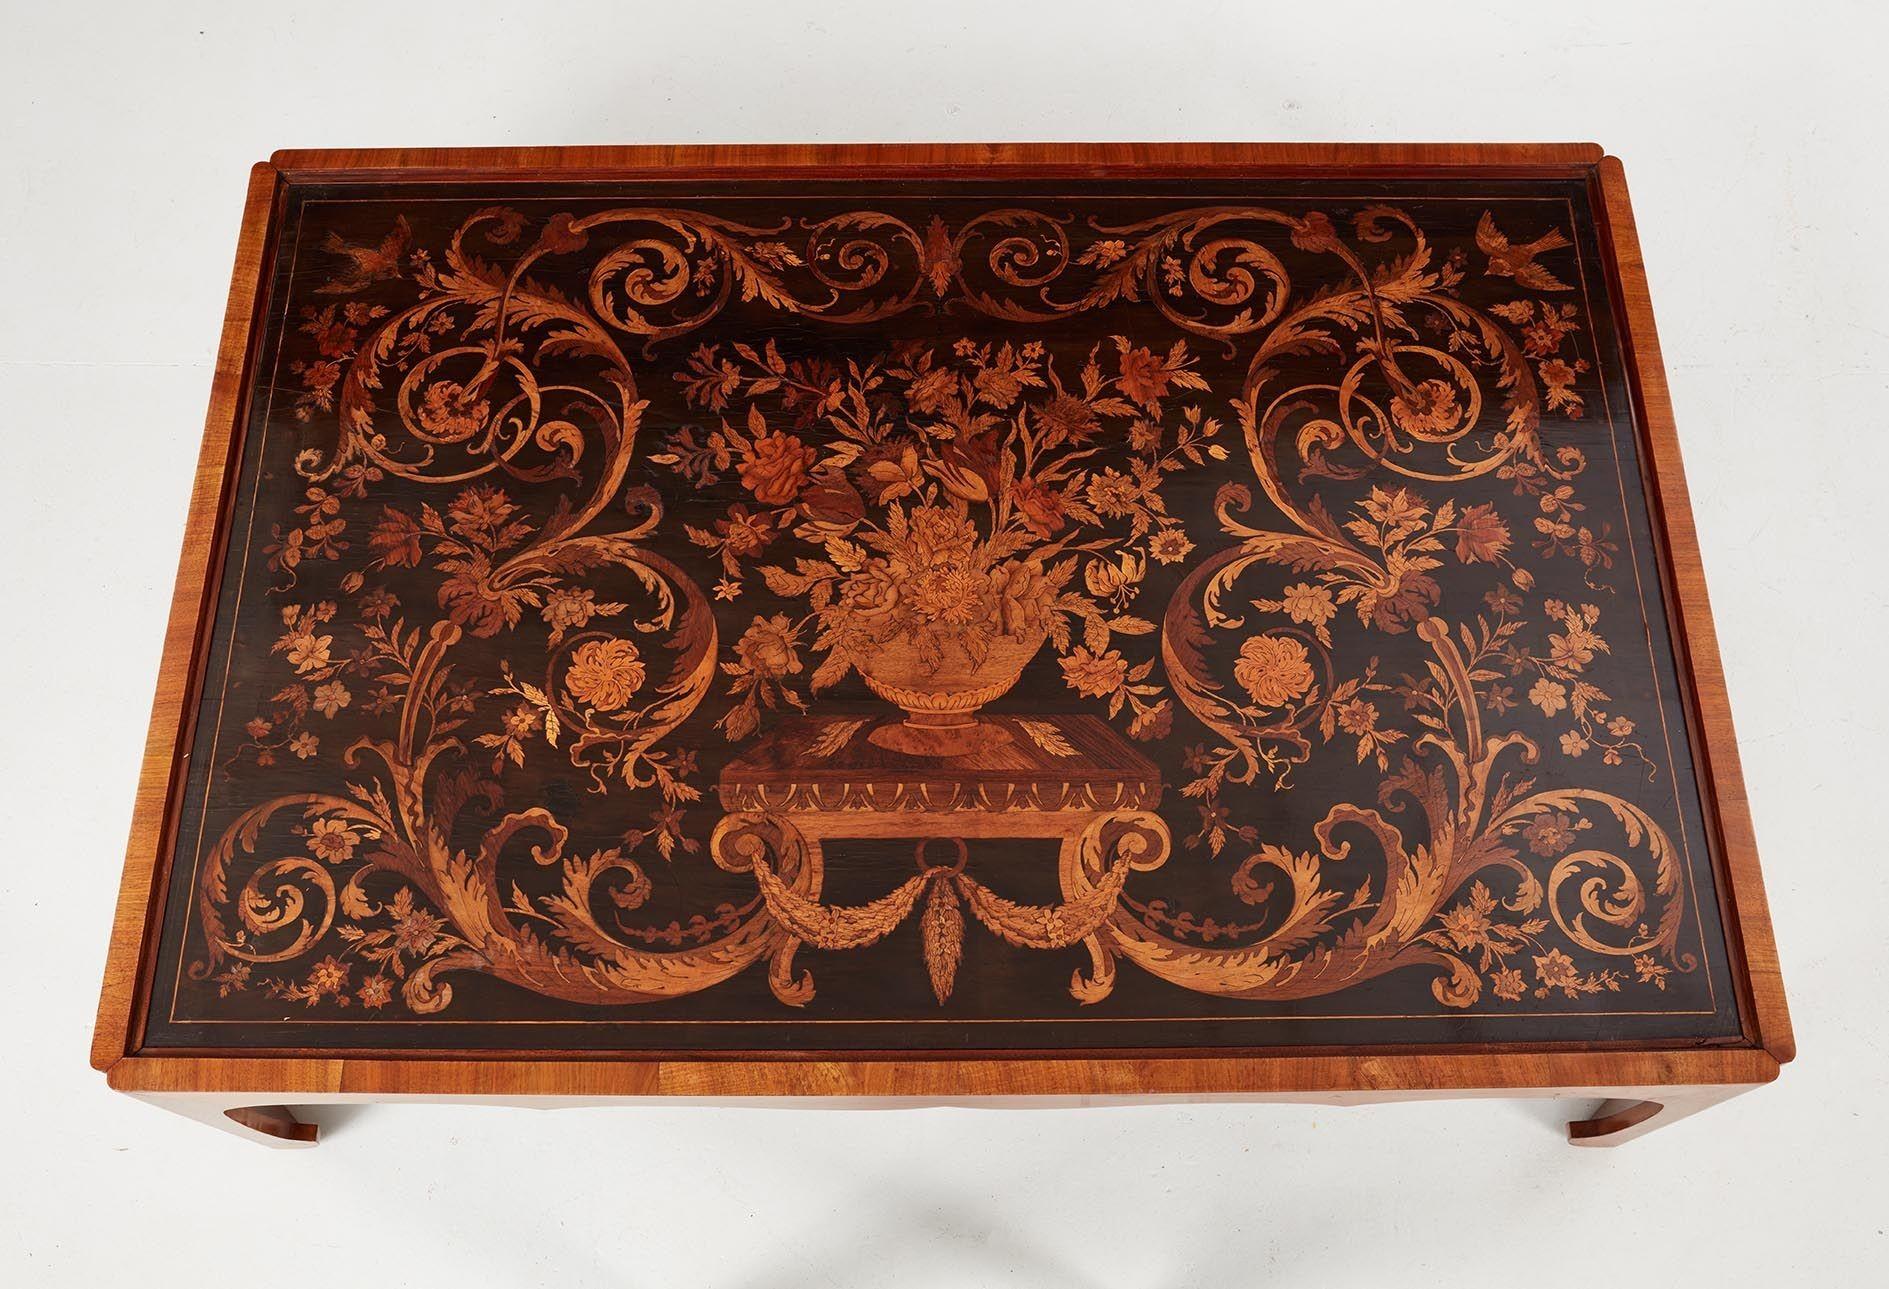 Remarkable 17th Century French marquetry panel now incorporated into a coffee table, the top elaborately inlaid with walnut, olive, fruitwood, ebony, holly, sycamore and other woods depicting a central flowering urn on pedestal amidst a sea of